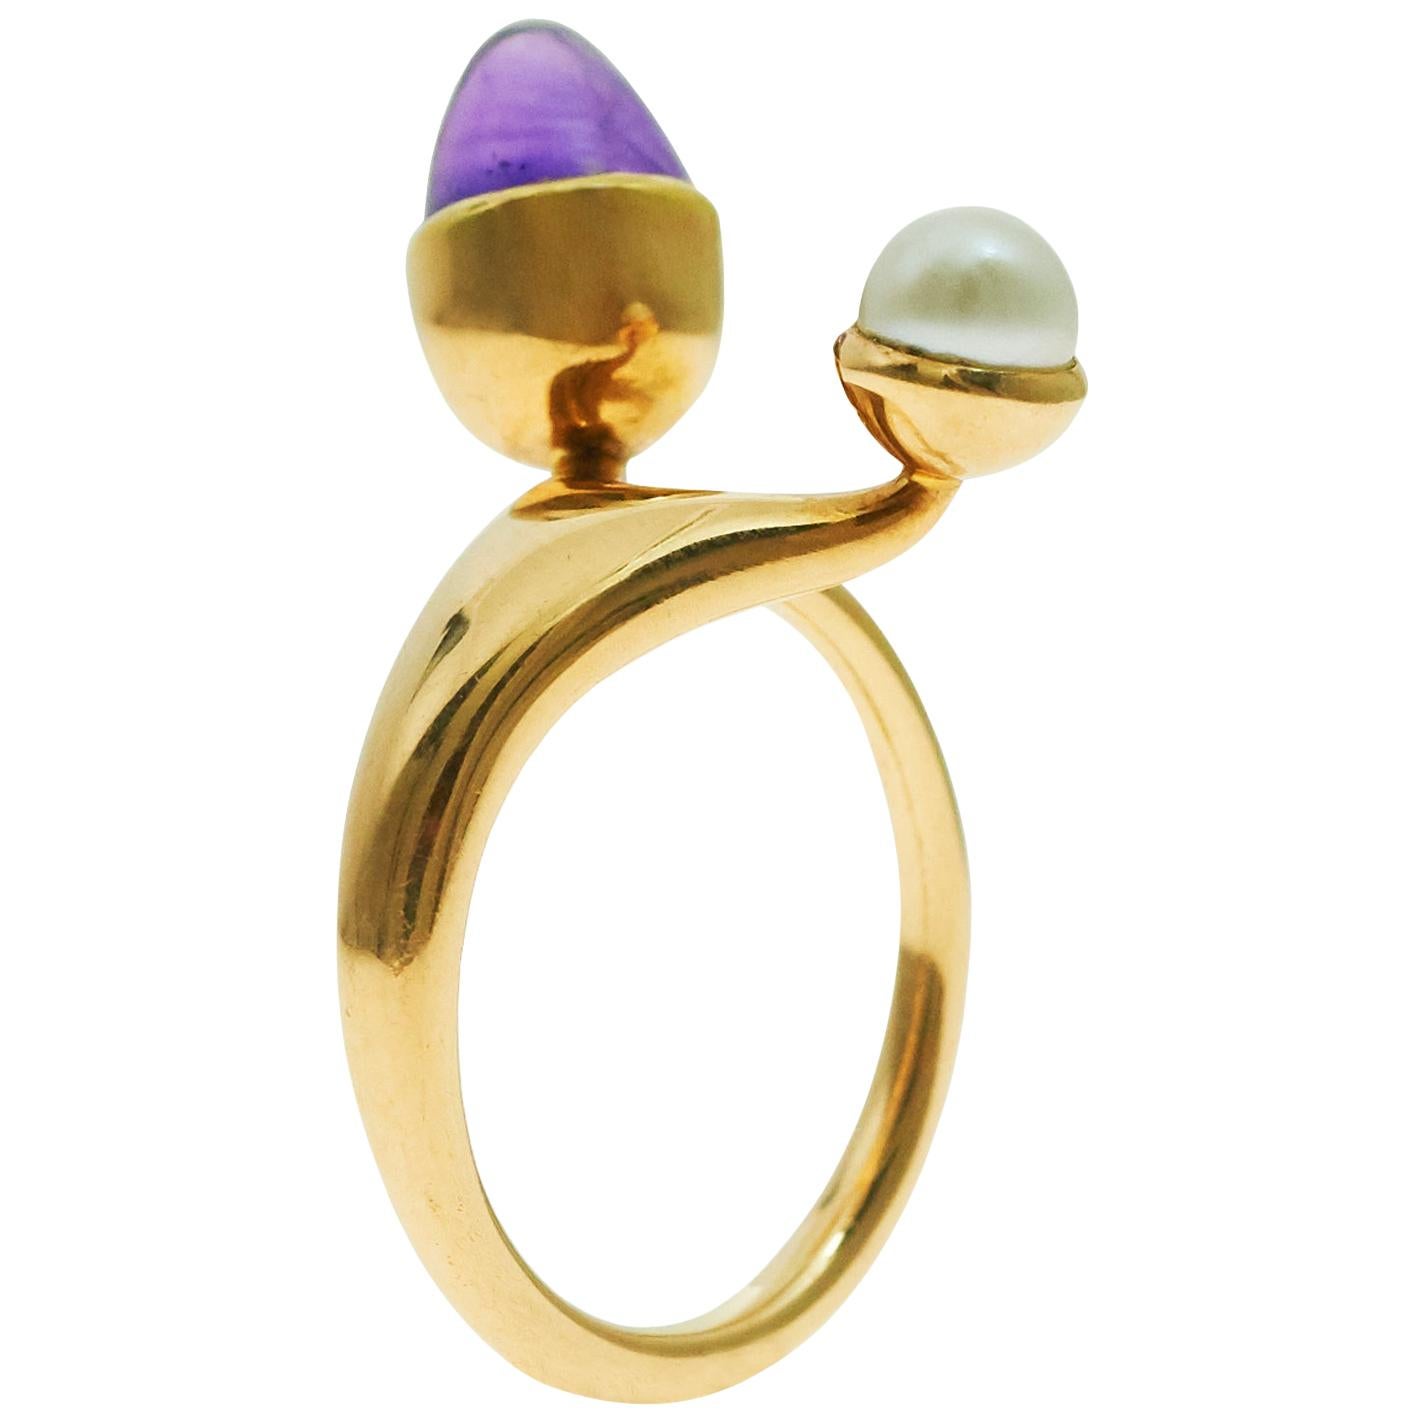 Bent Knudsen Amethyst, Pearl and Gold Ring, circa 1970s